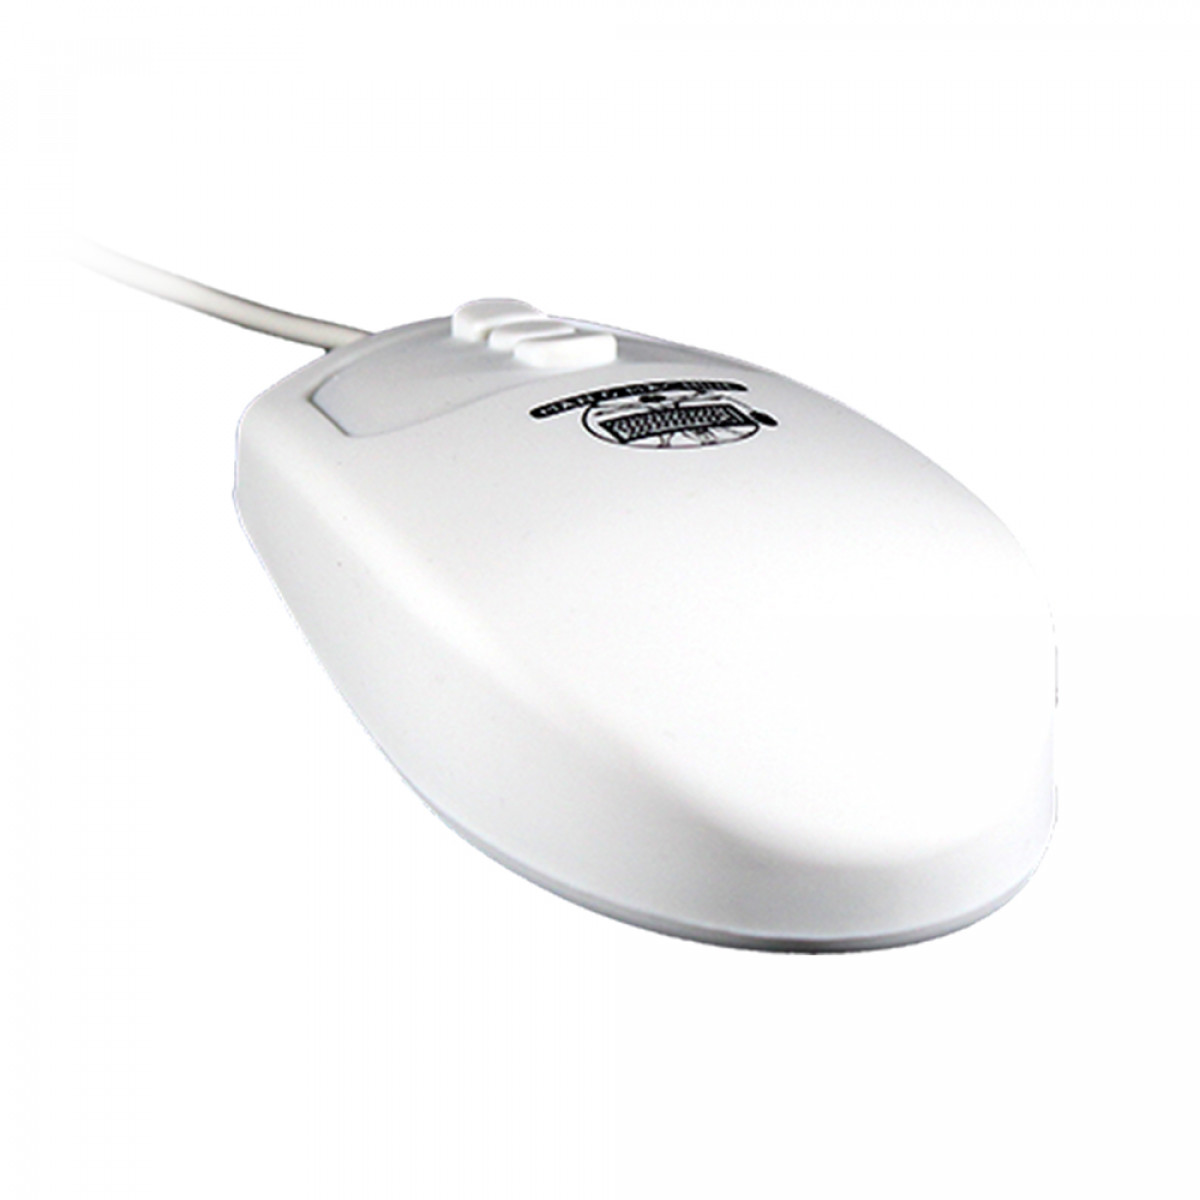 Man & Machine Medical Grade Mighty Mouse